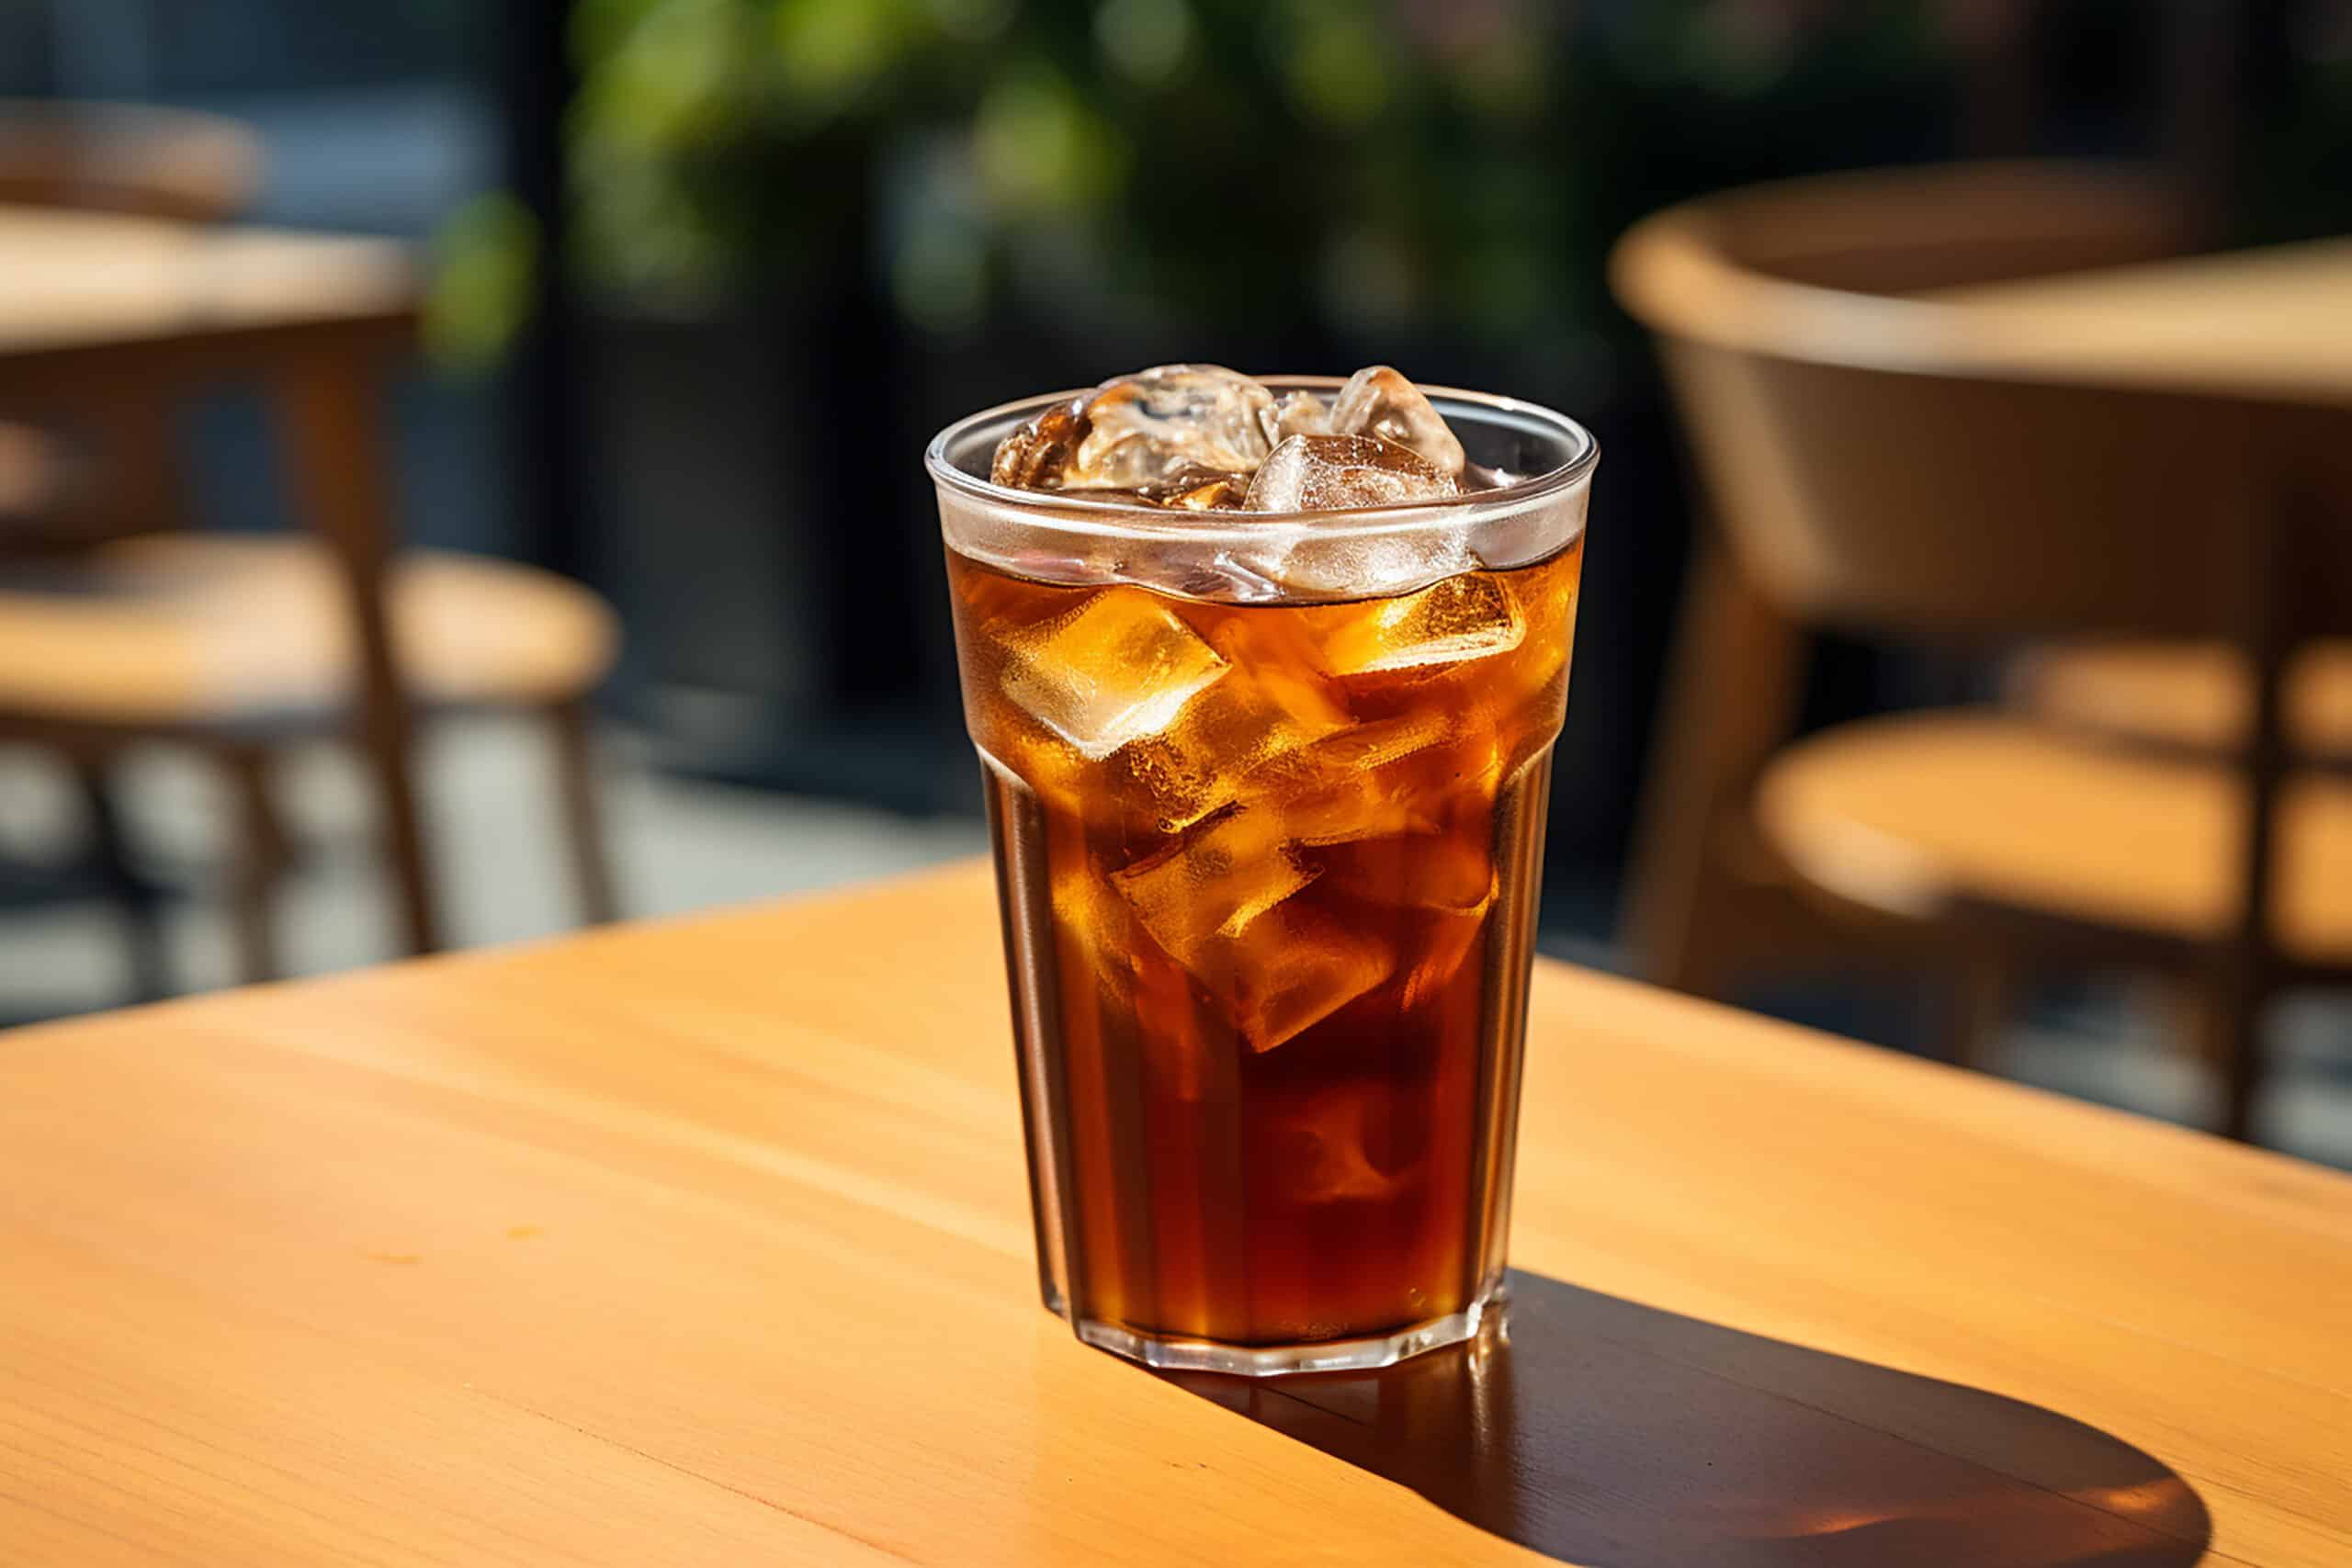 www.appr.com : How To Make Cold Brew Coffee With Ground Coffee?